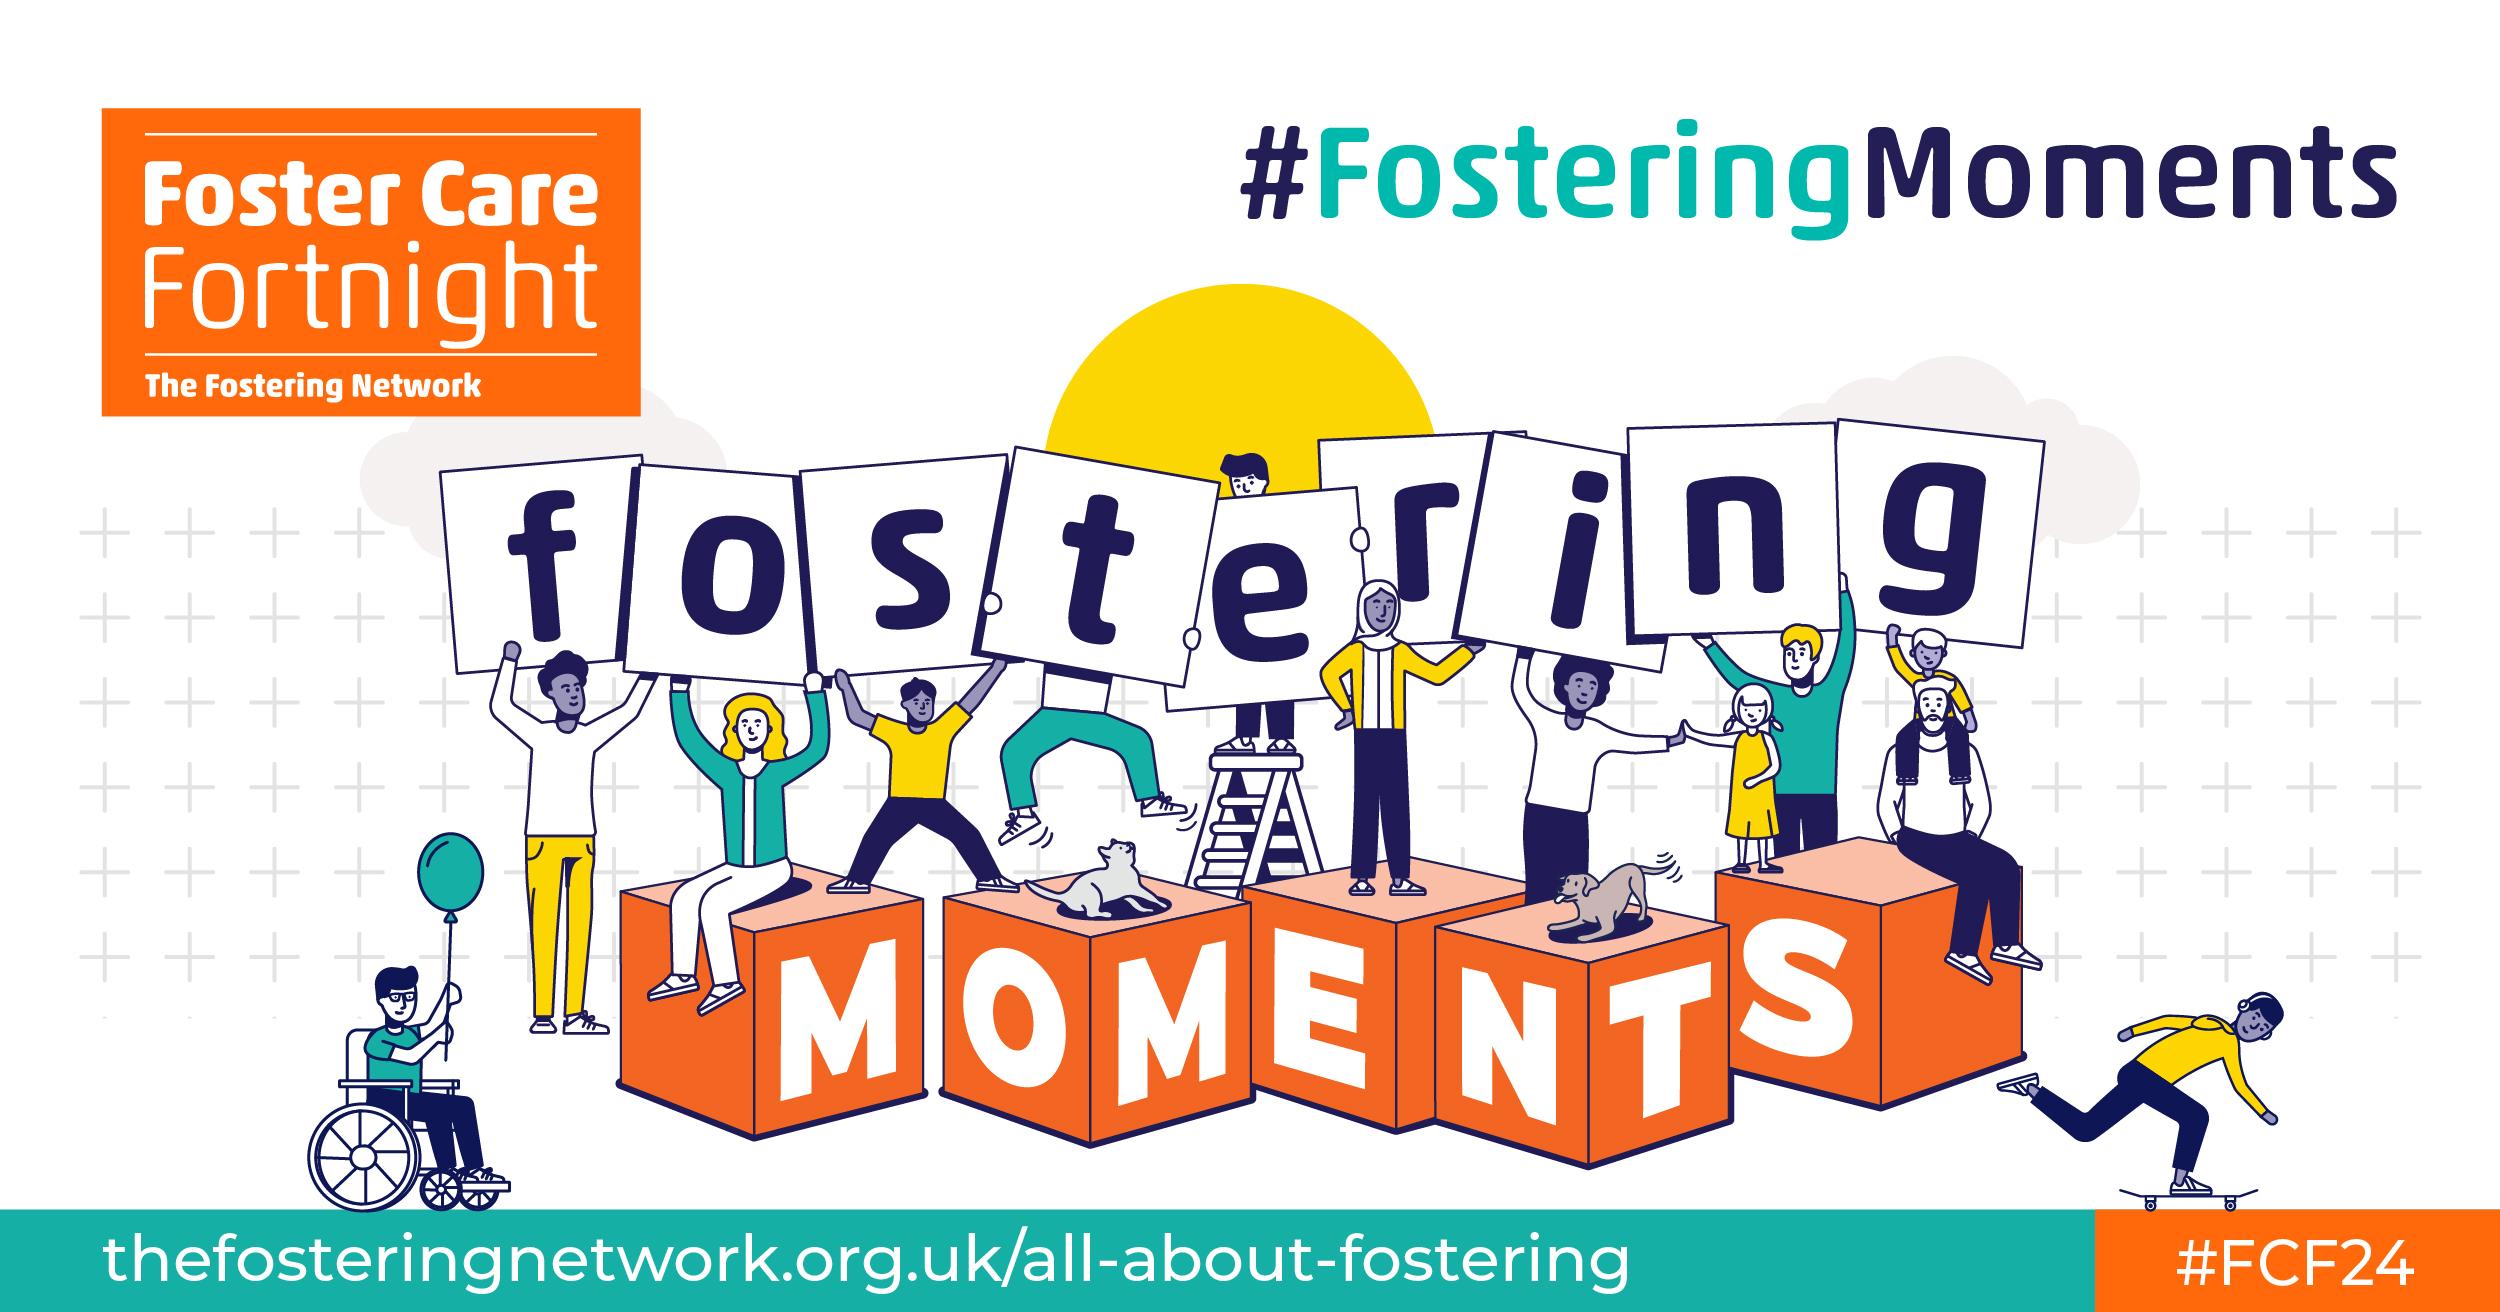 The annual campaign raises awareness of fostering